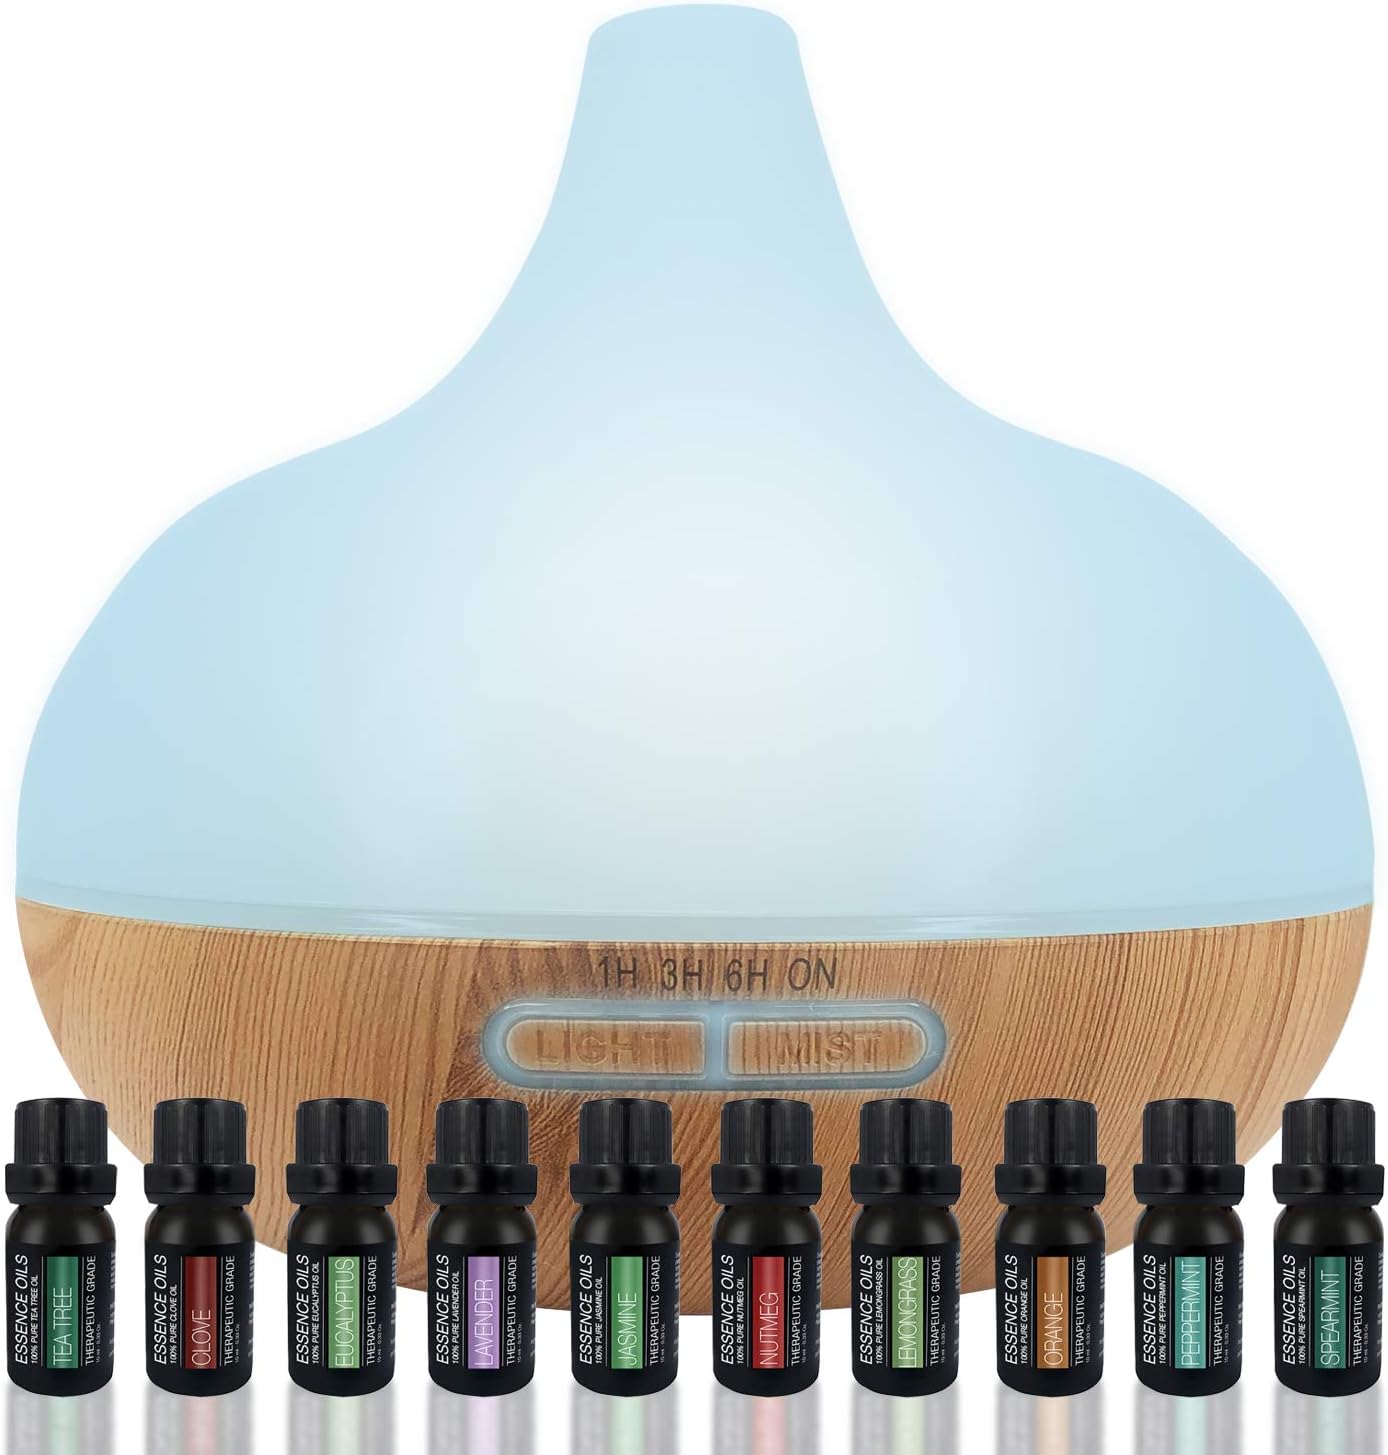 Pure Daily Care 300 ml Aromatherapy Diffuser & 10 Therapeutic Grade Essential Oil Set, Triangle Light Brown - image 1 of 7